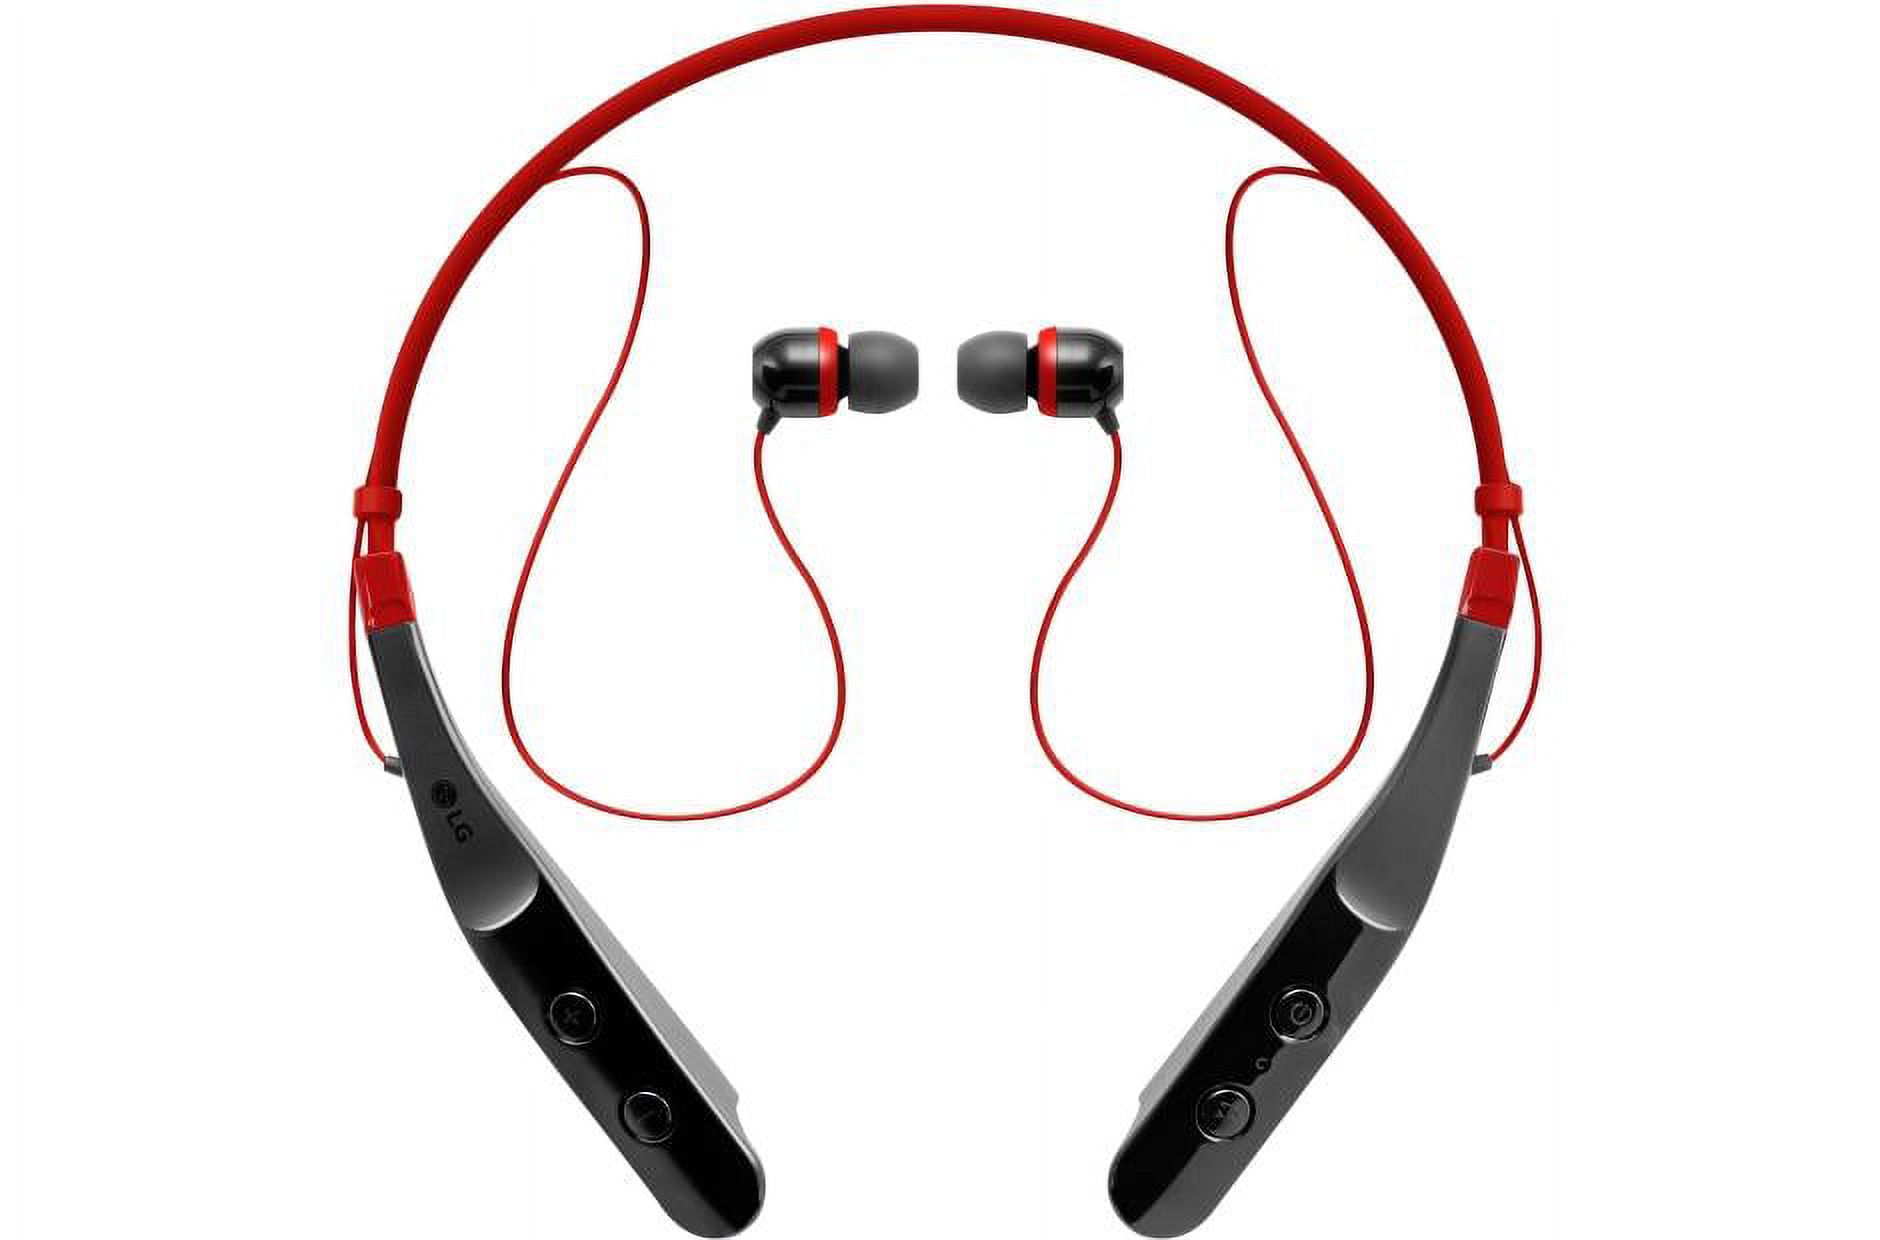 LG TONE Style HBS-SL5 Bluetooth Wireless Stereo Headset - image 1 of 4